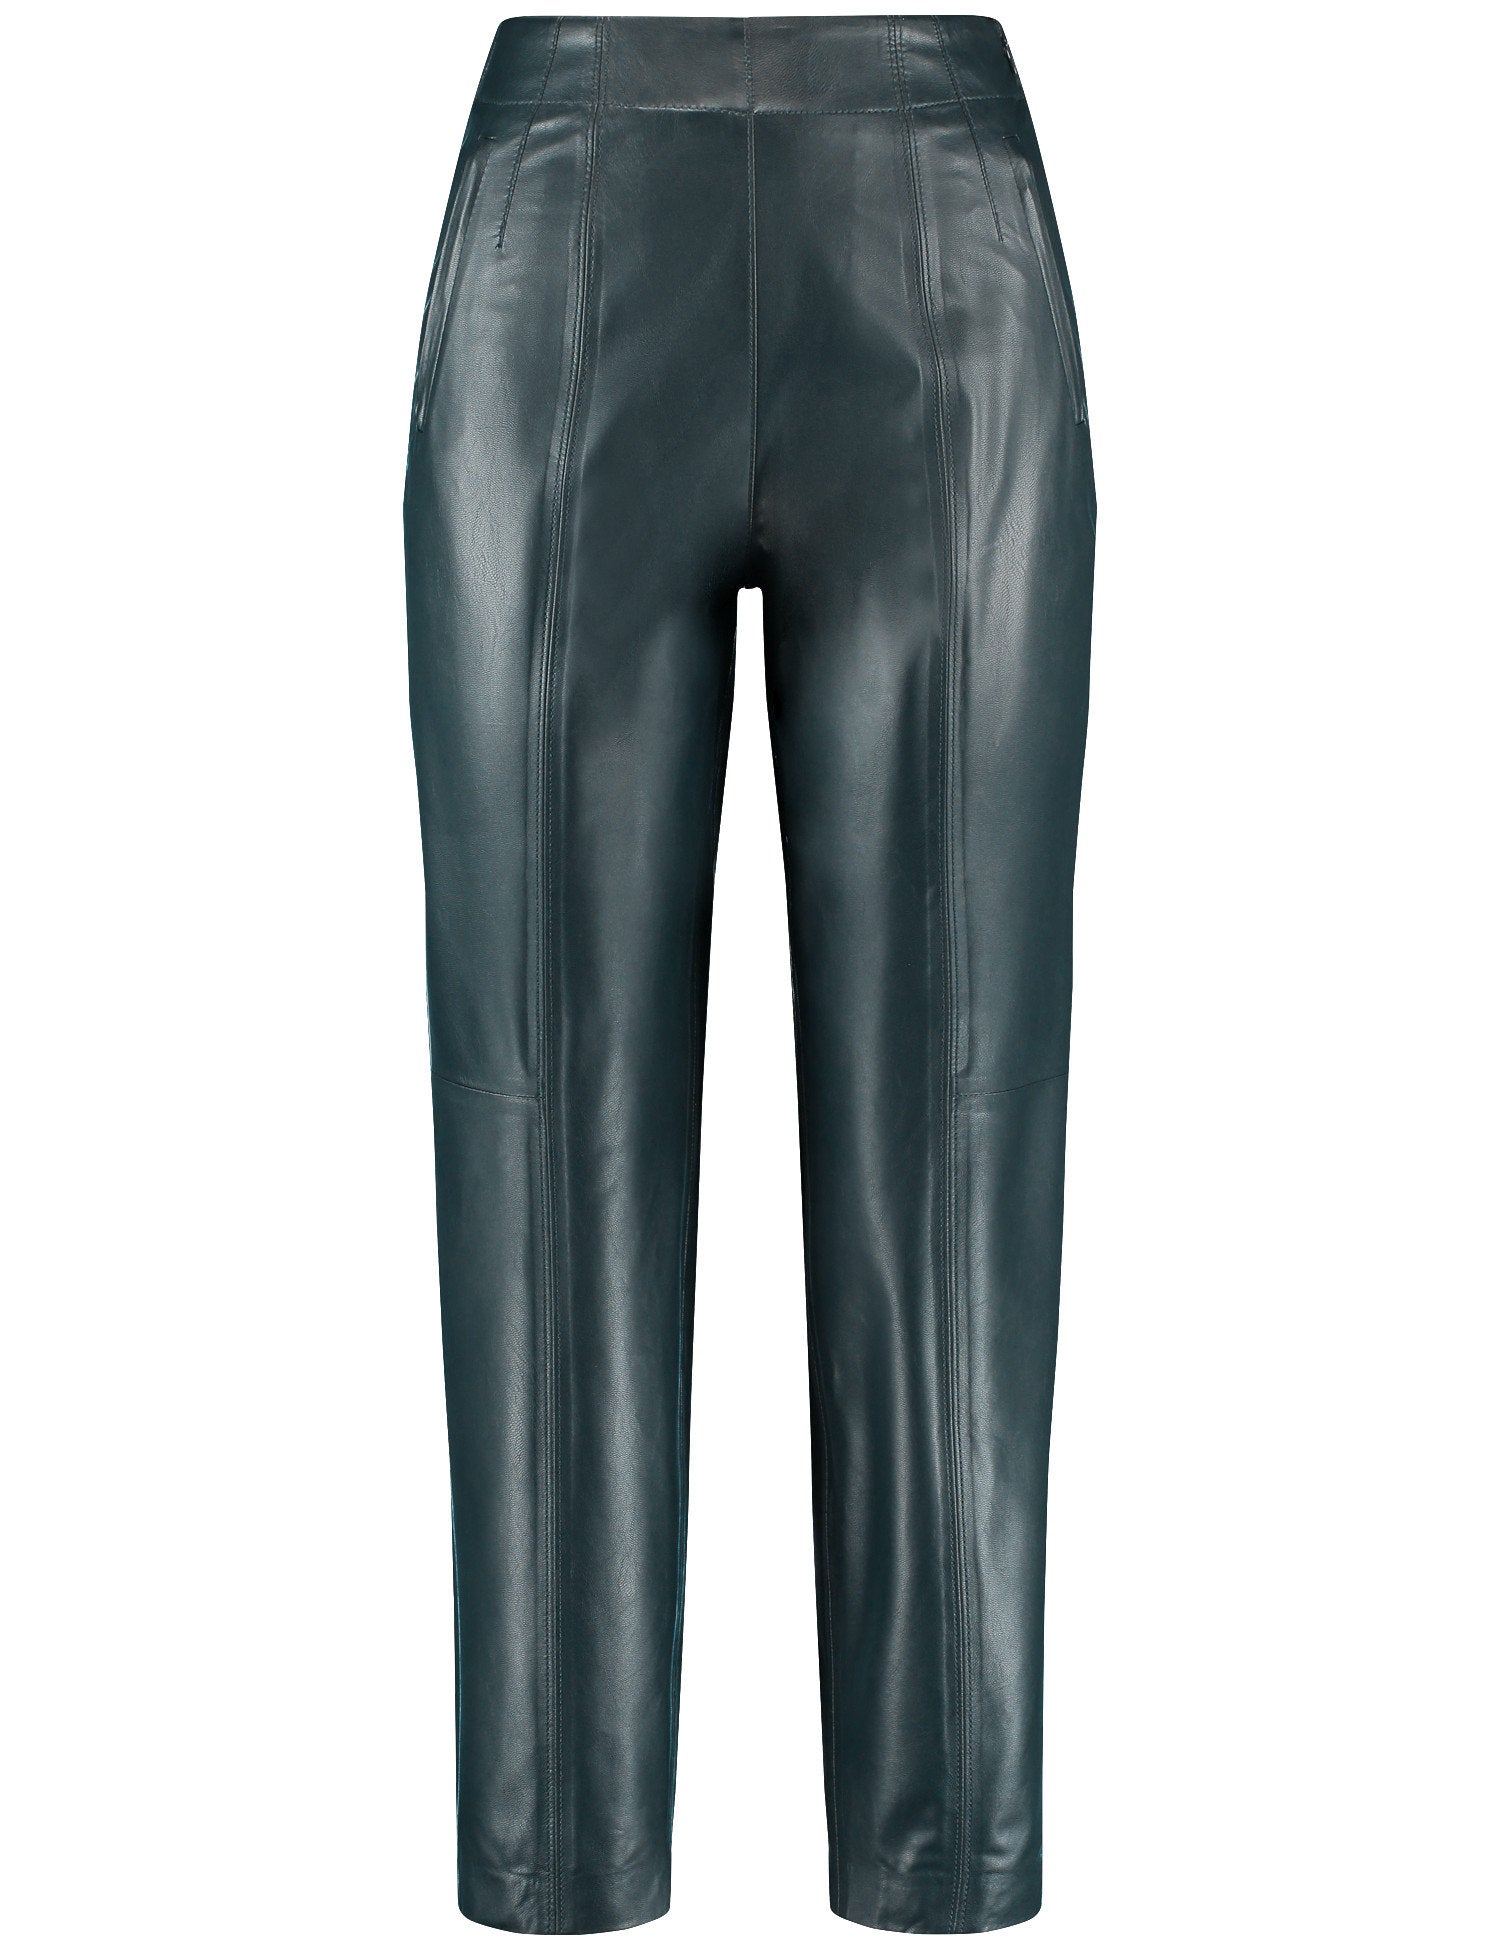 Fashionable 7-8-Length Faux Leather Trousers_220031-31223_50939_01